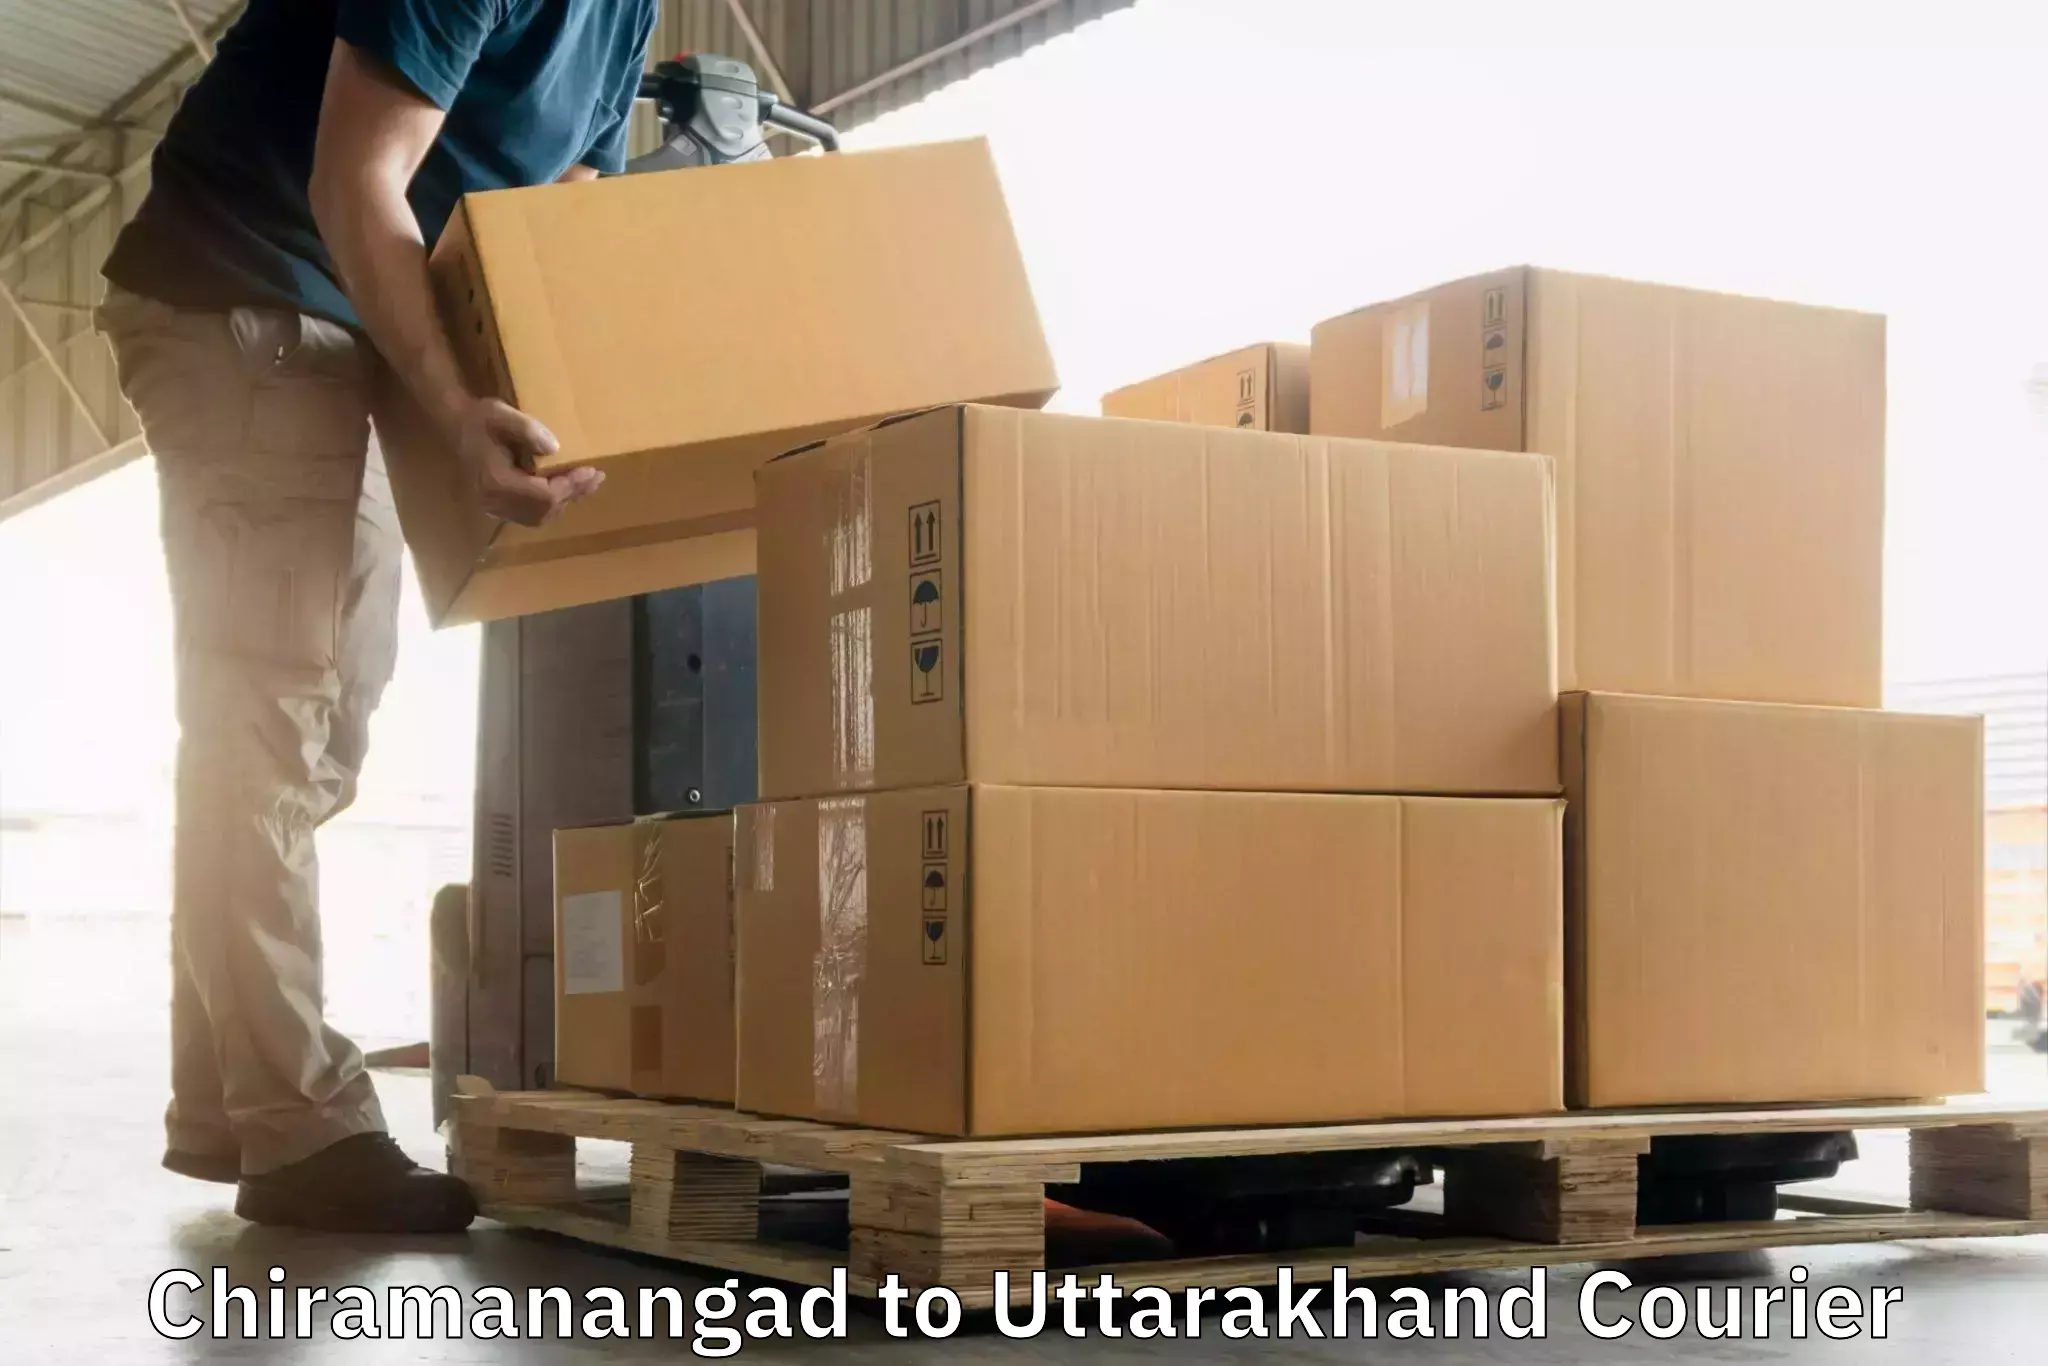 Parcel delivery automation Chiramanangad to Bhagwanpur